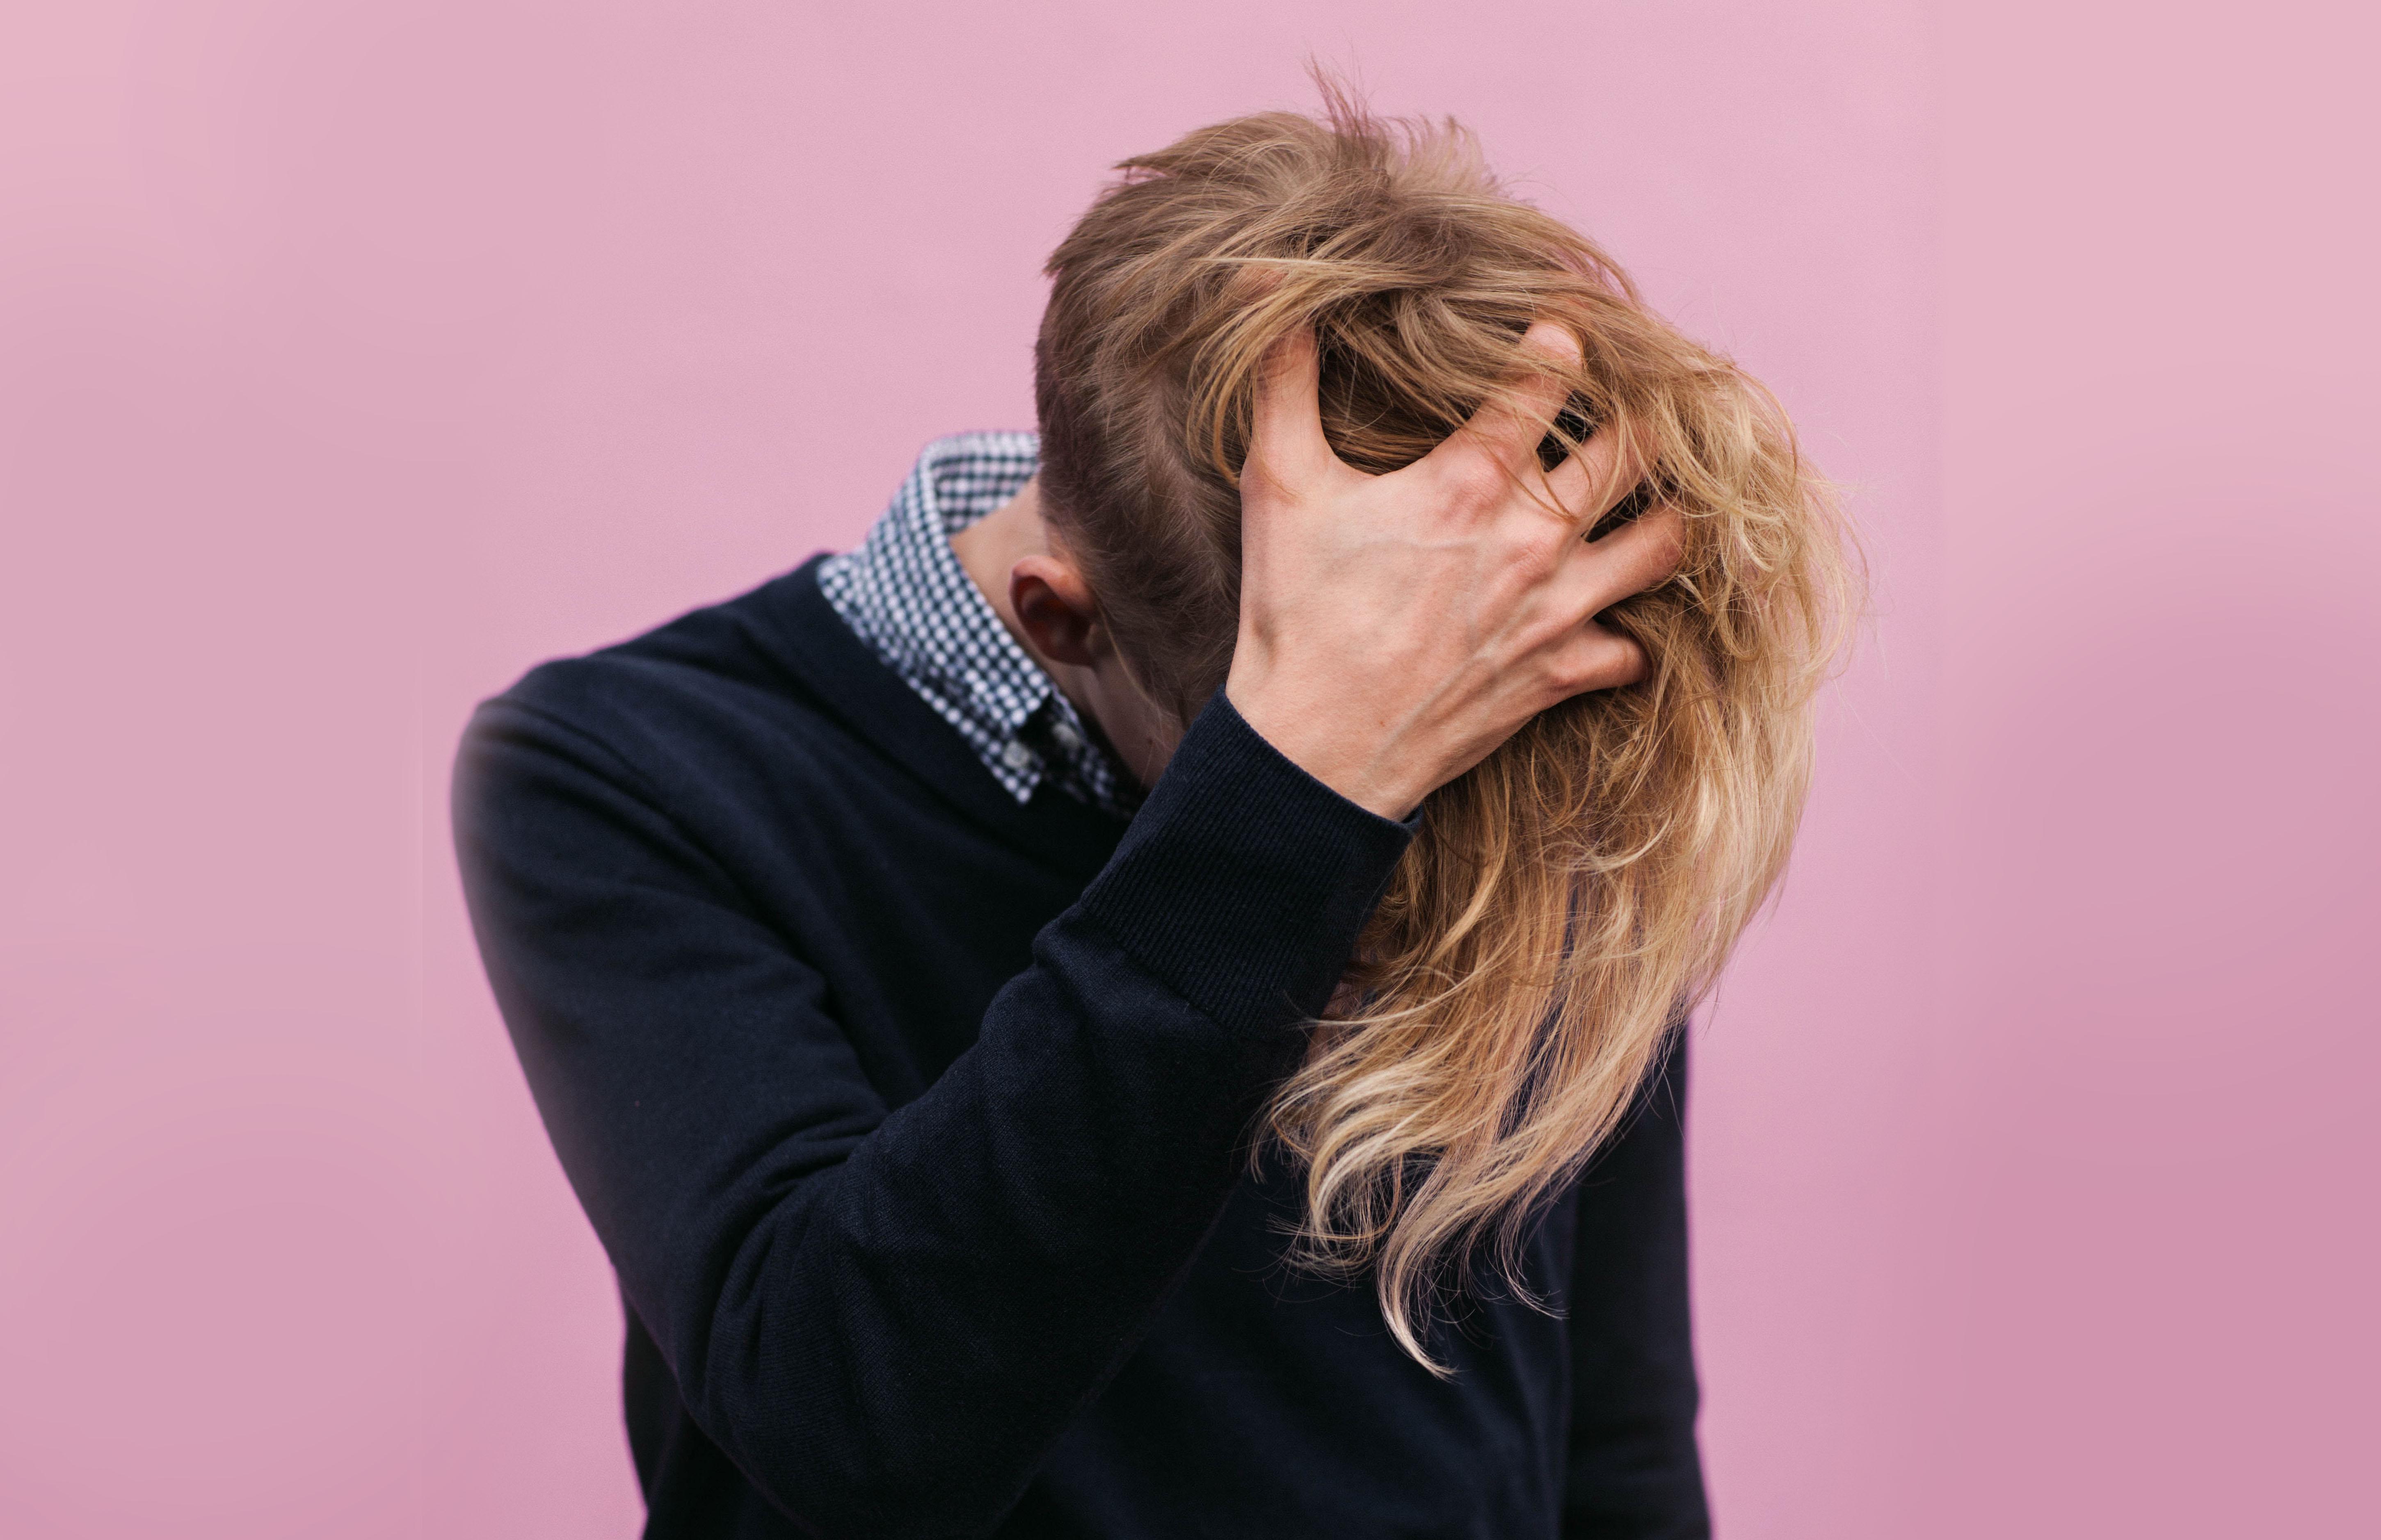 Gender neutral person with long blonde hair on a pink background